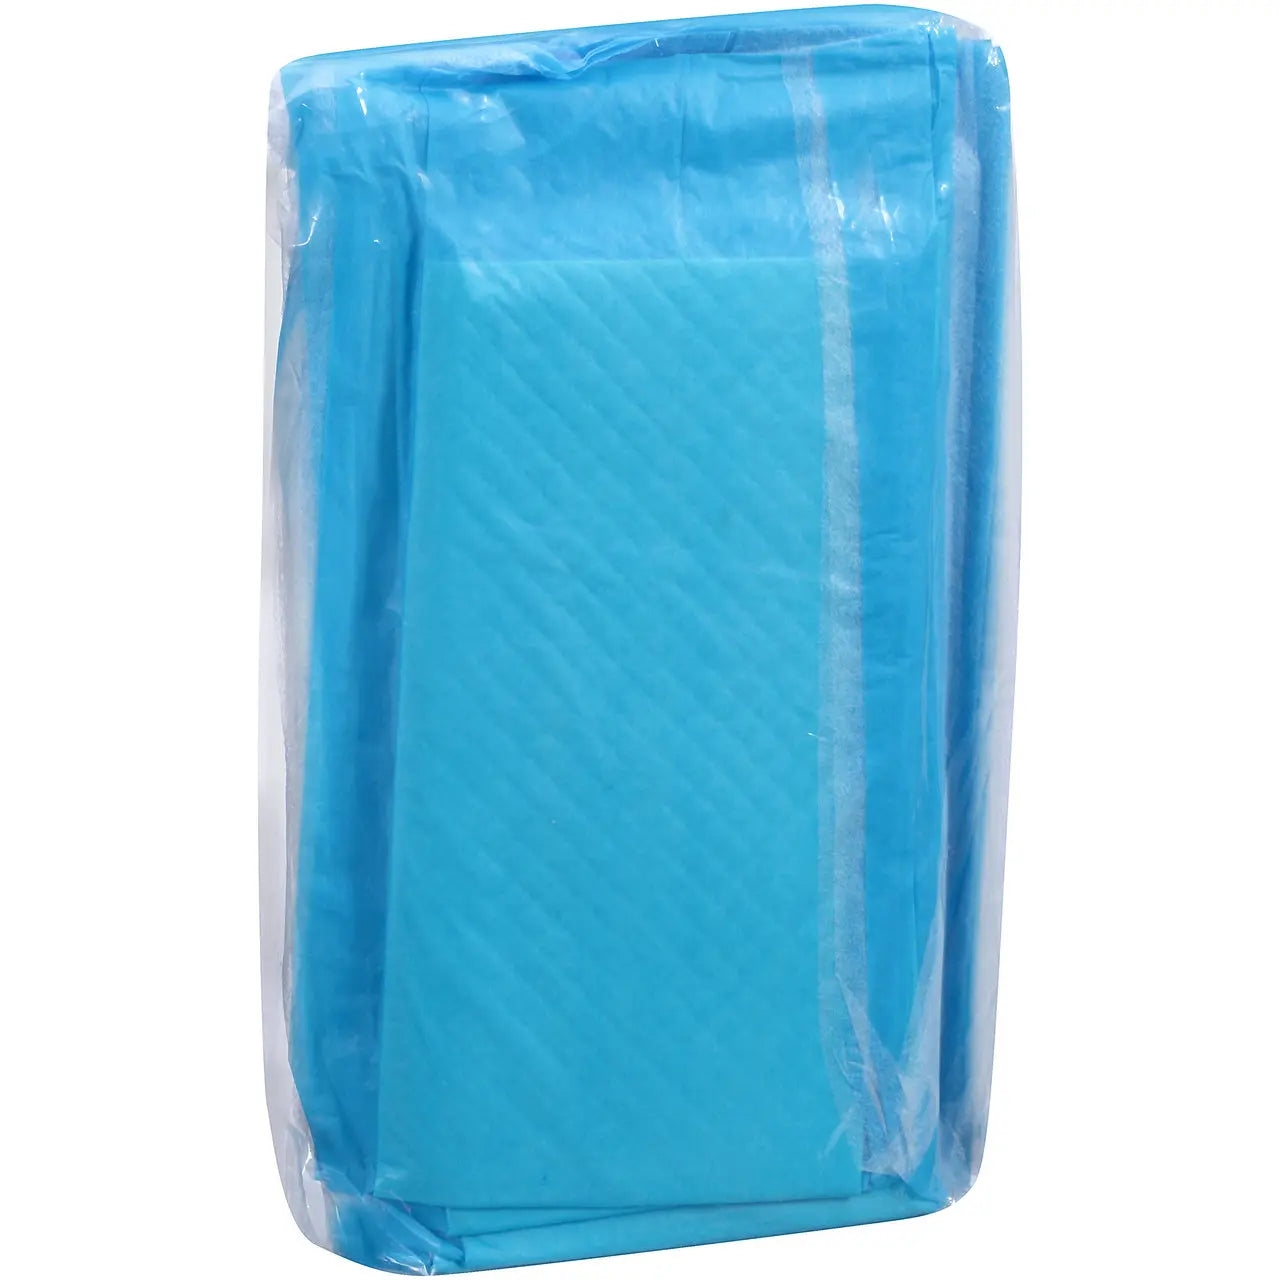 31928 - Attends Care Dri-Sorb Underpads, 30"X30" - 15 Bags Of 10= CASE